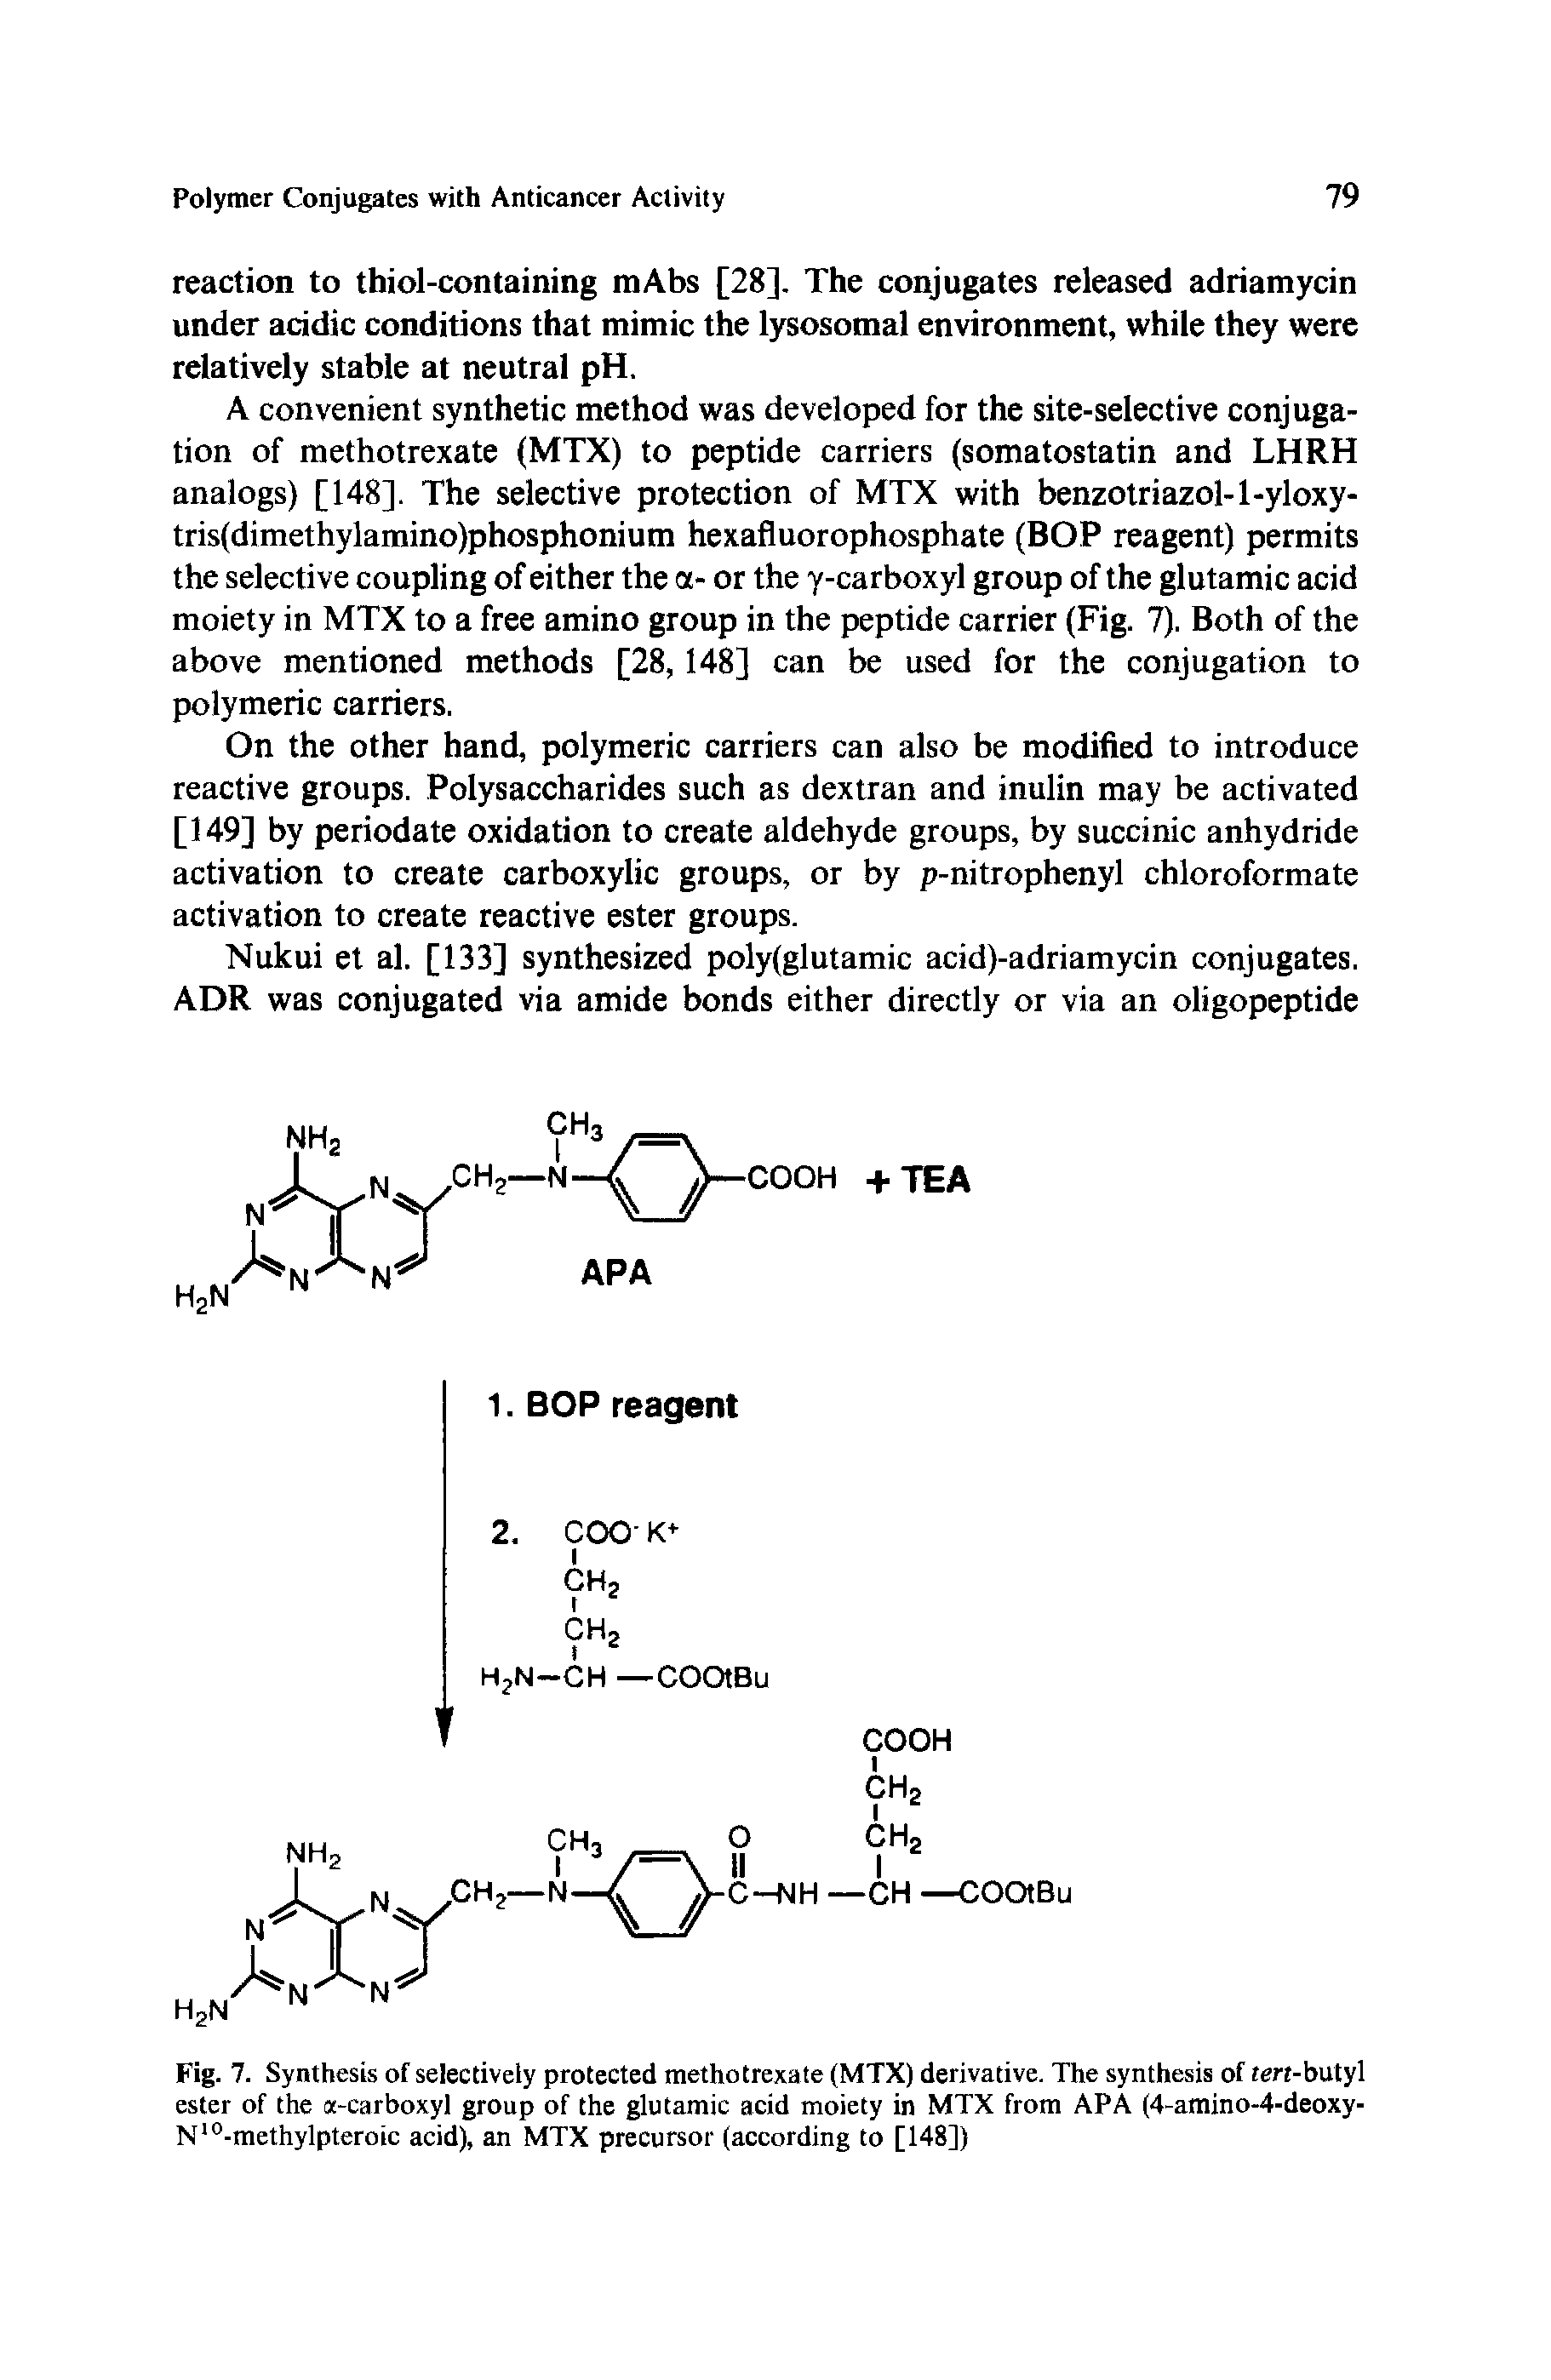 Fig. 7. Synthesis of selectively protected methotrexate (MTX) derivative. The synthesis of ten-butyl ester of the ot-carboxyl group of the glutamic acid moiety in MTX from APA (4-amino-4-deoxy-N10-methylpteroic acid), an MTX precursor (according to [148])...